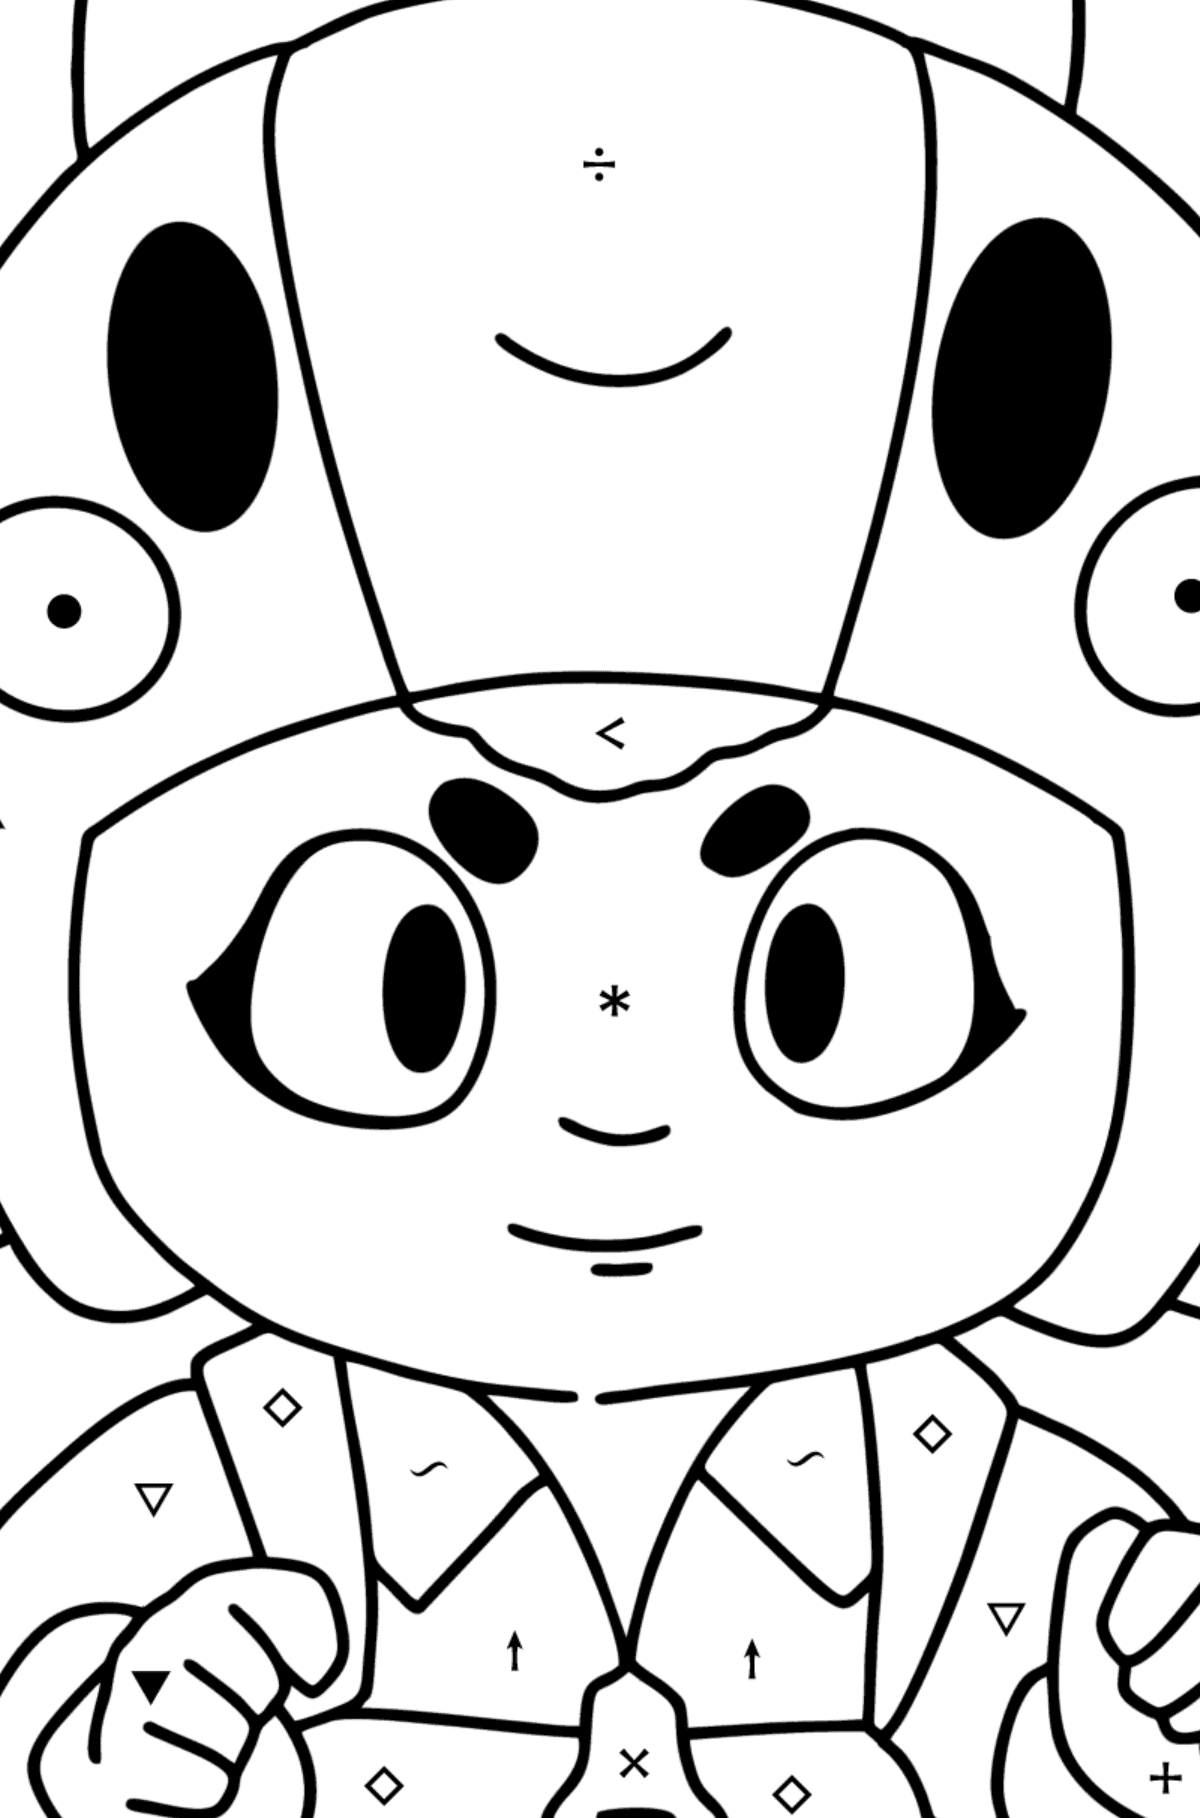 Brawl Stars Bea coloring page - Coloring by Symbols for Kids